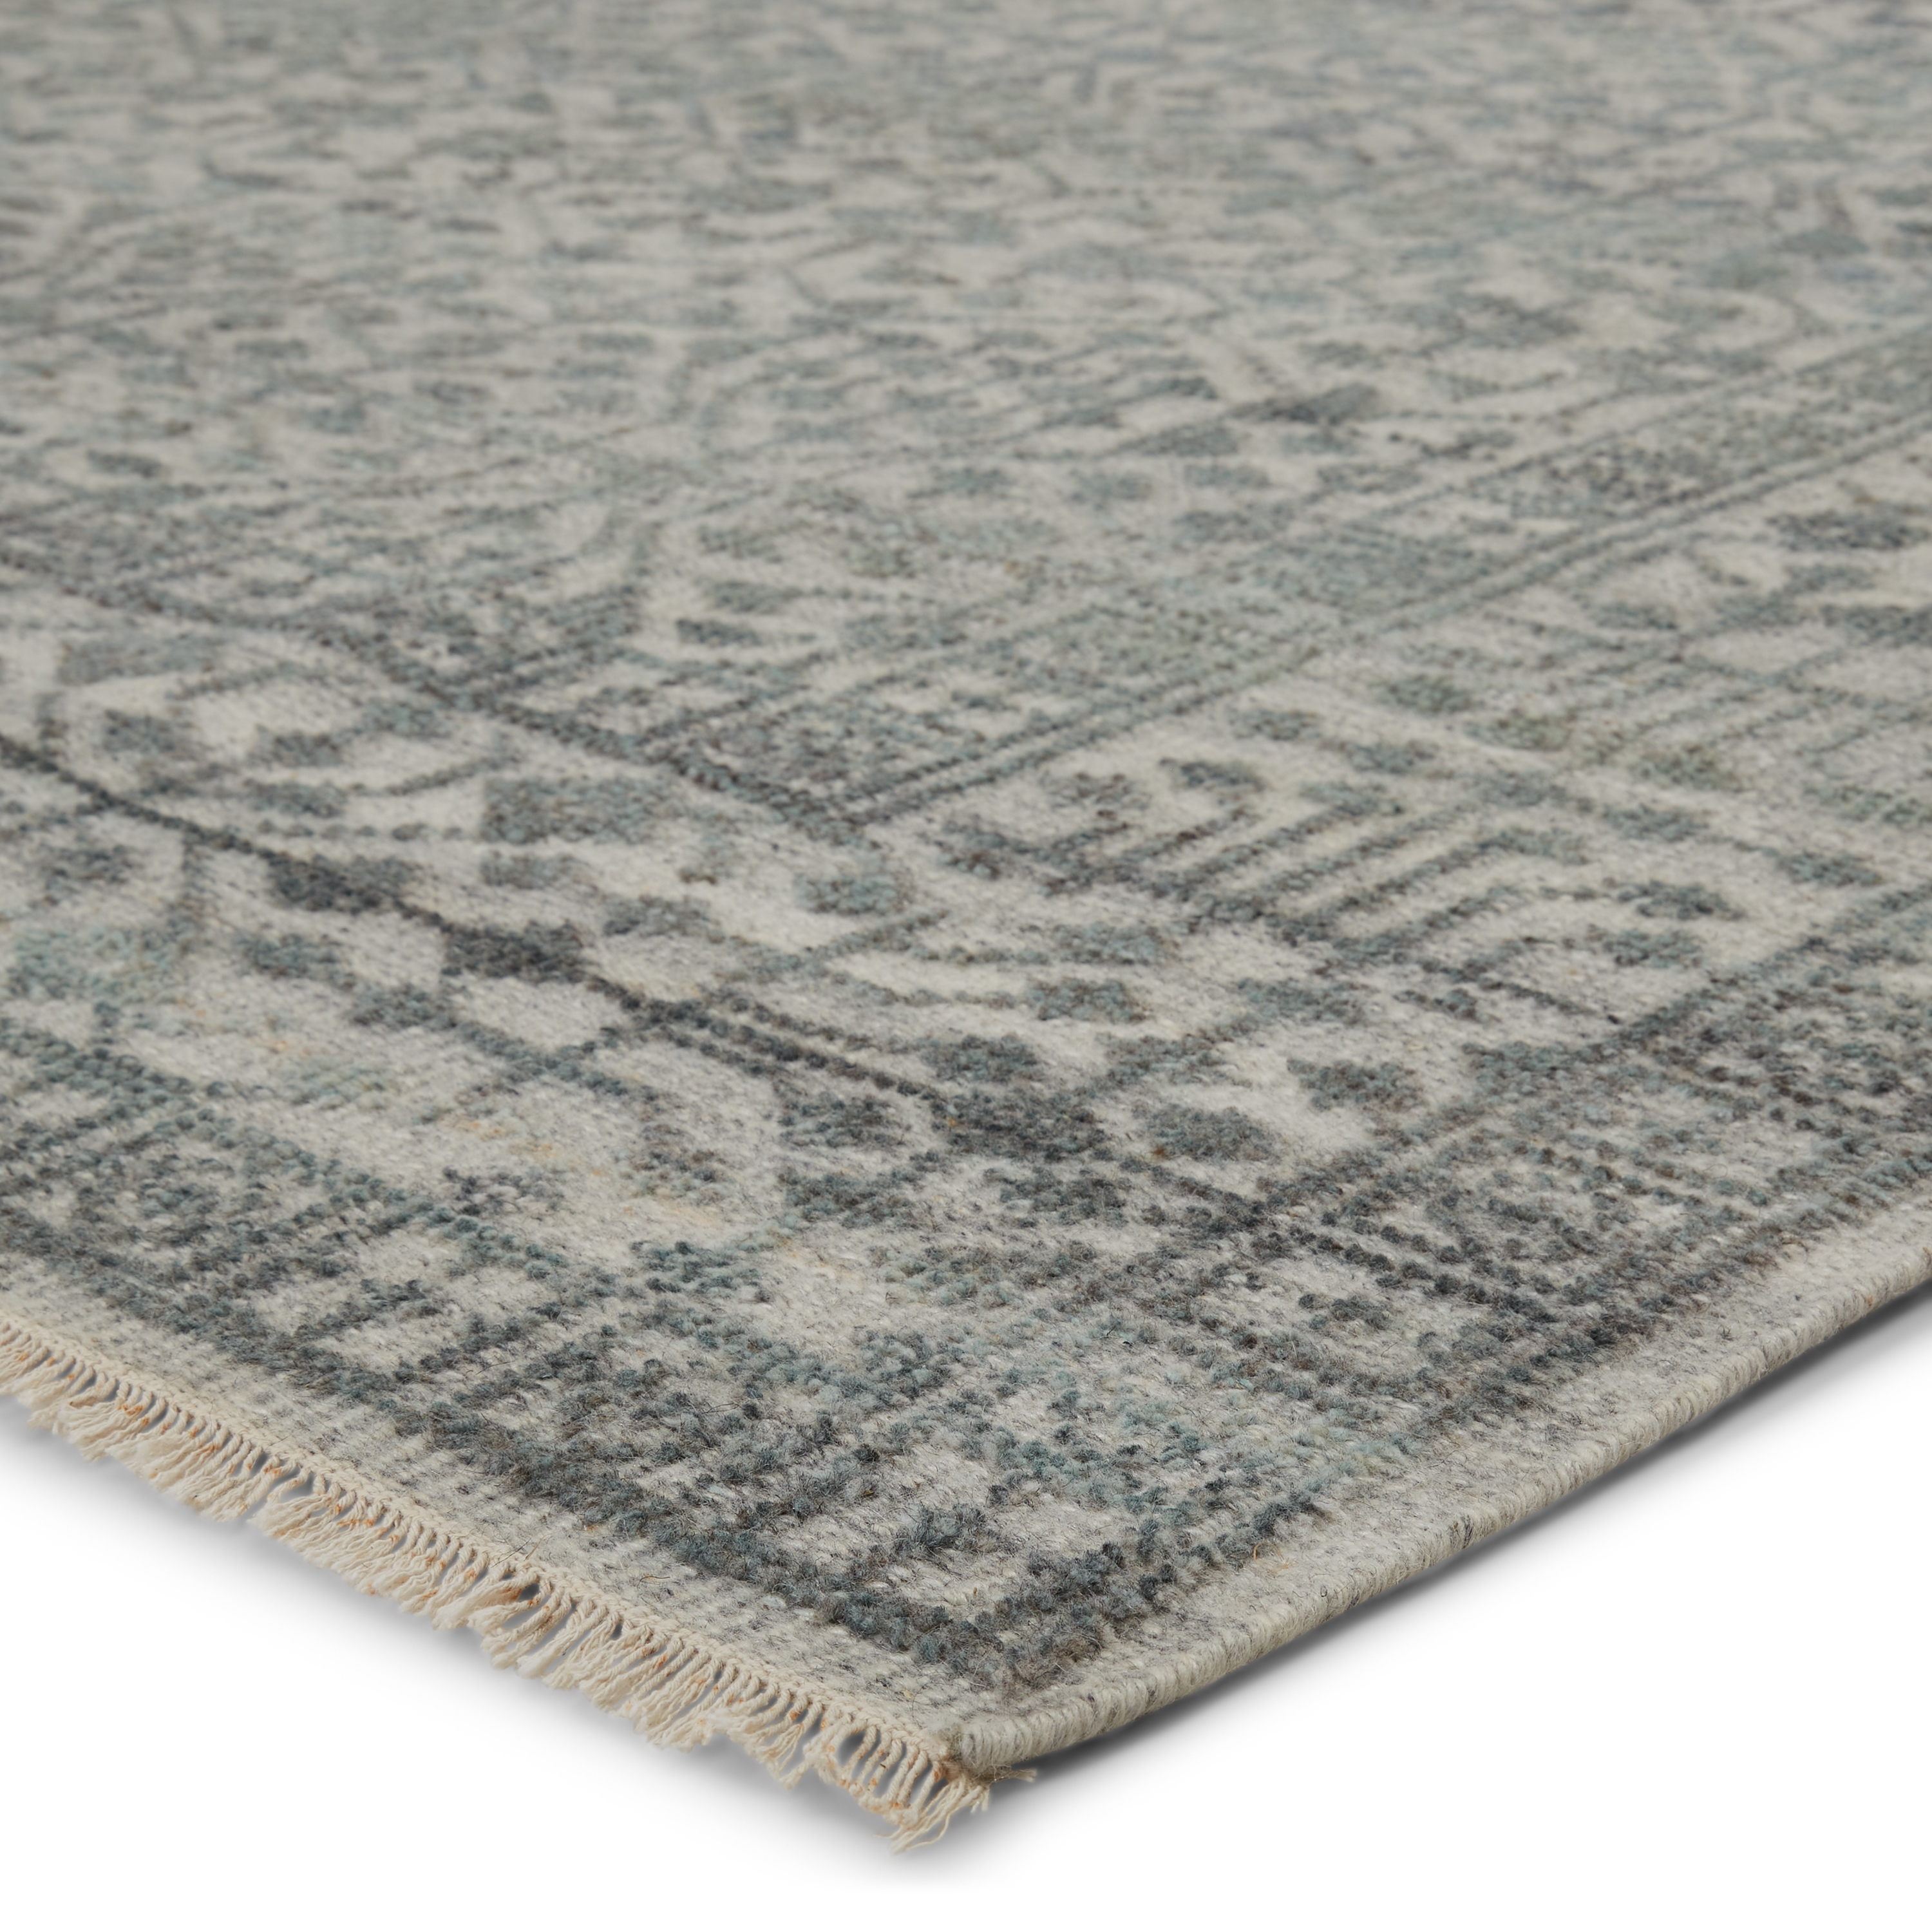 Arinna Hand-Knotted Tribal Gray/ Light Blue Area Rug (8'X10') - Image 1